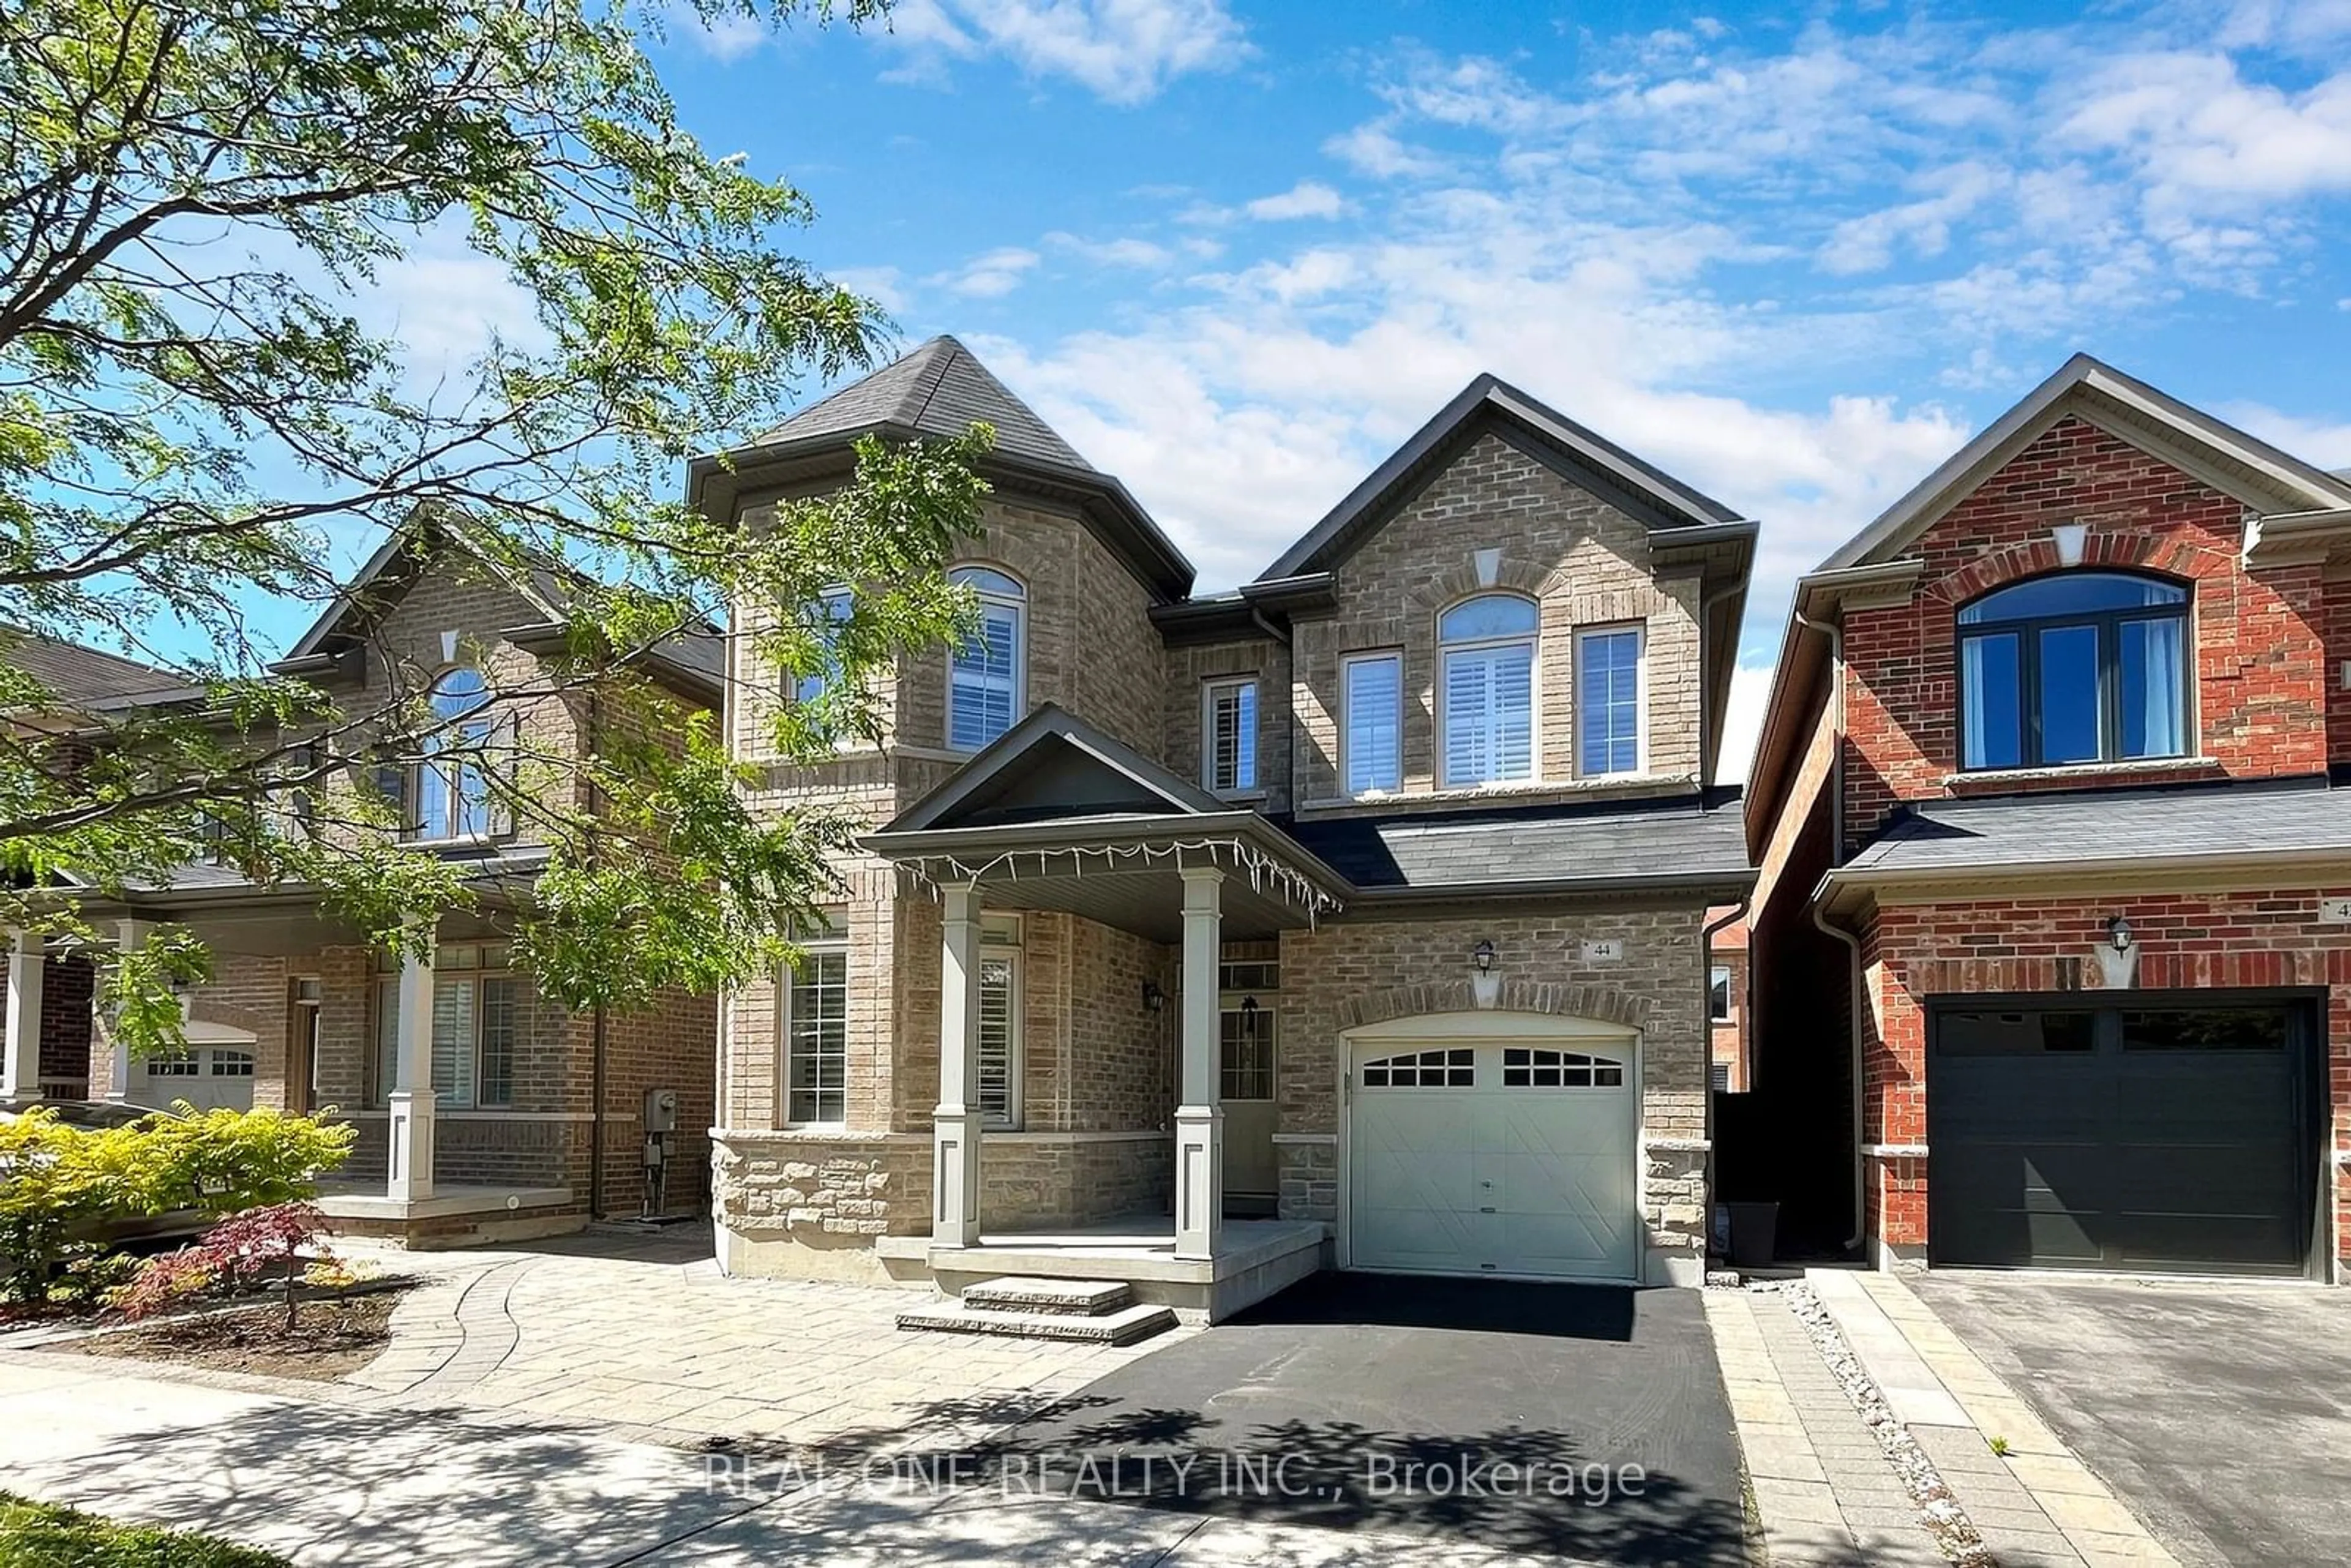 Home with brick exterior material for 44 Bracknell Ave, Markham Ontario L6C 0R3